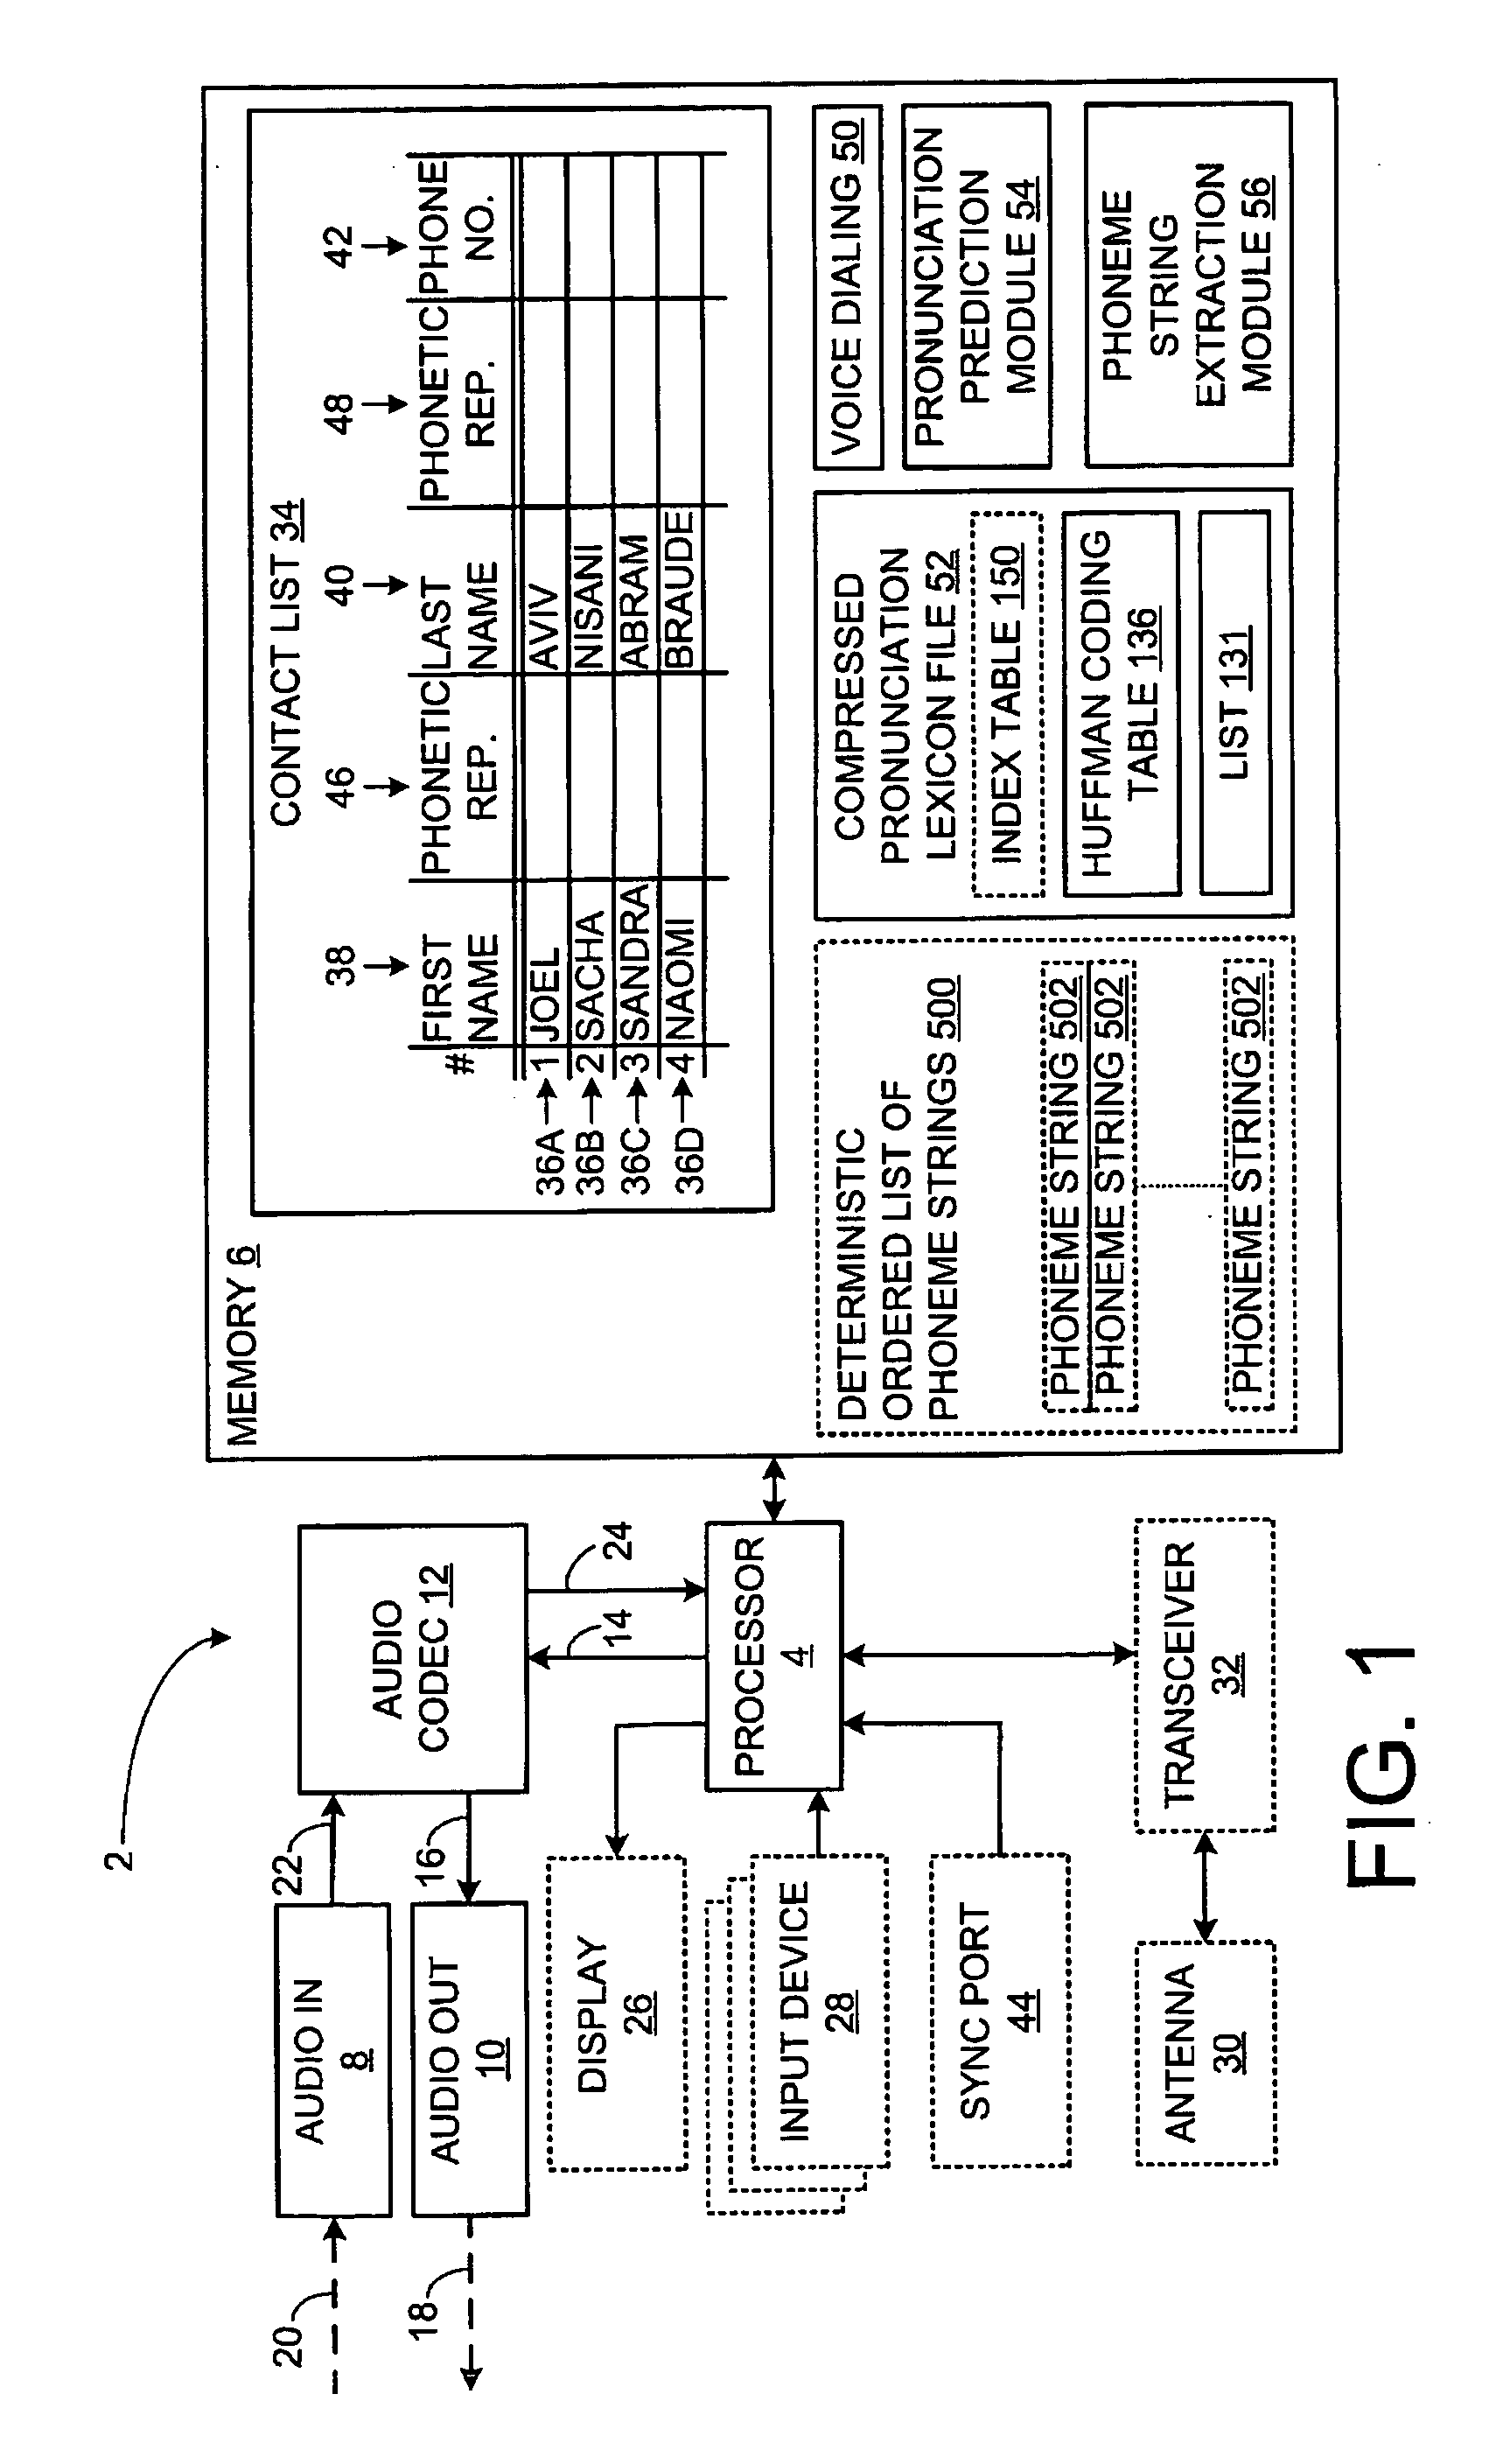 Apparatus and methods for pronunciation lexicon compression